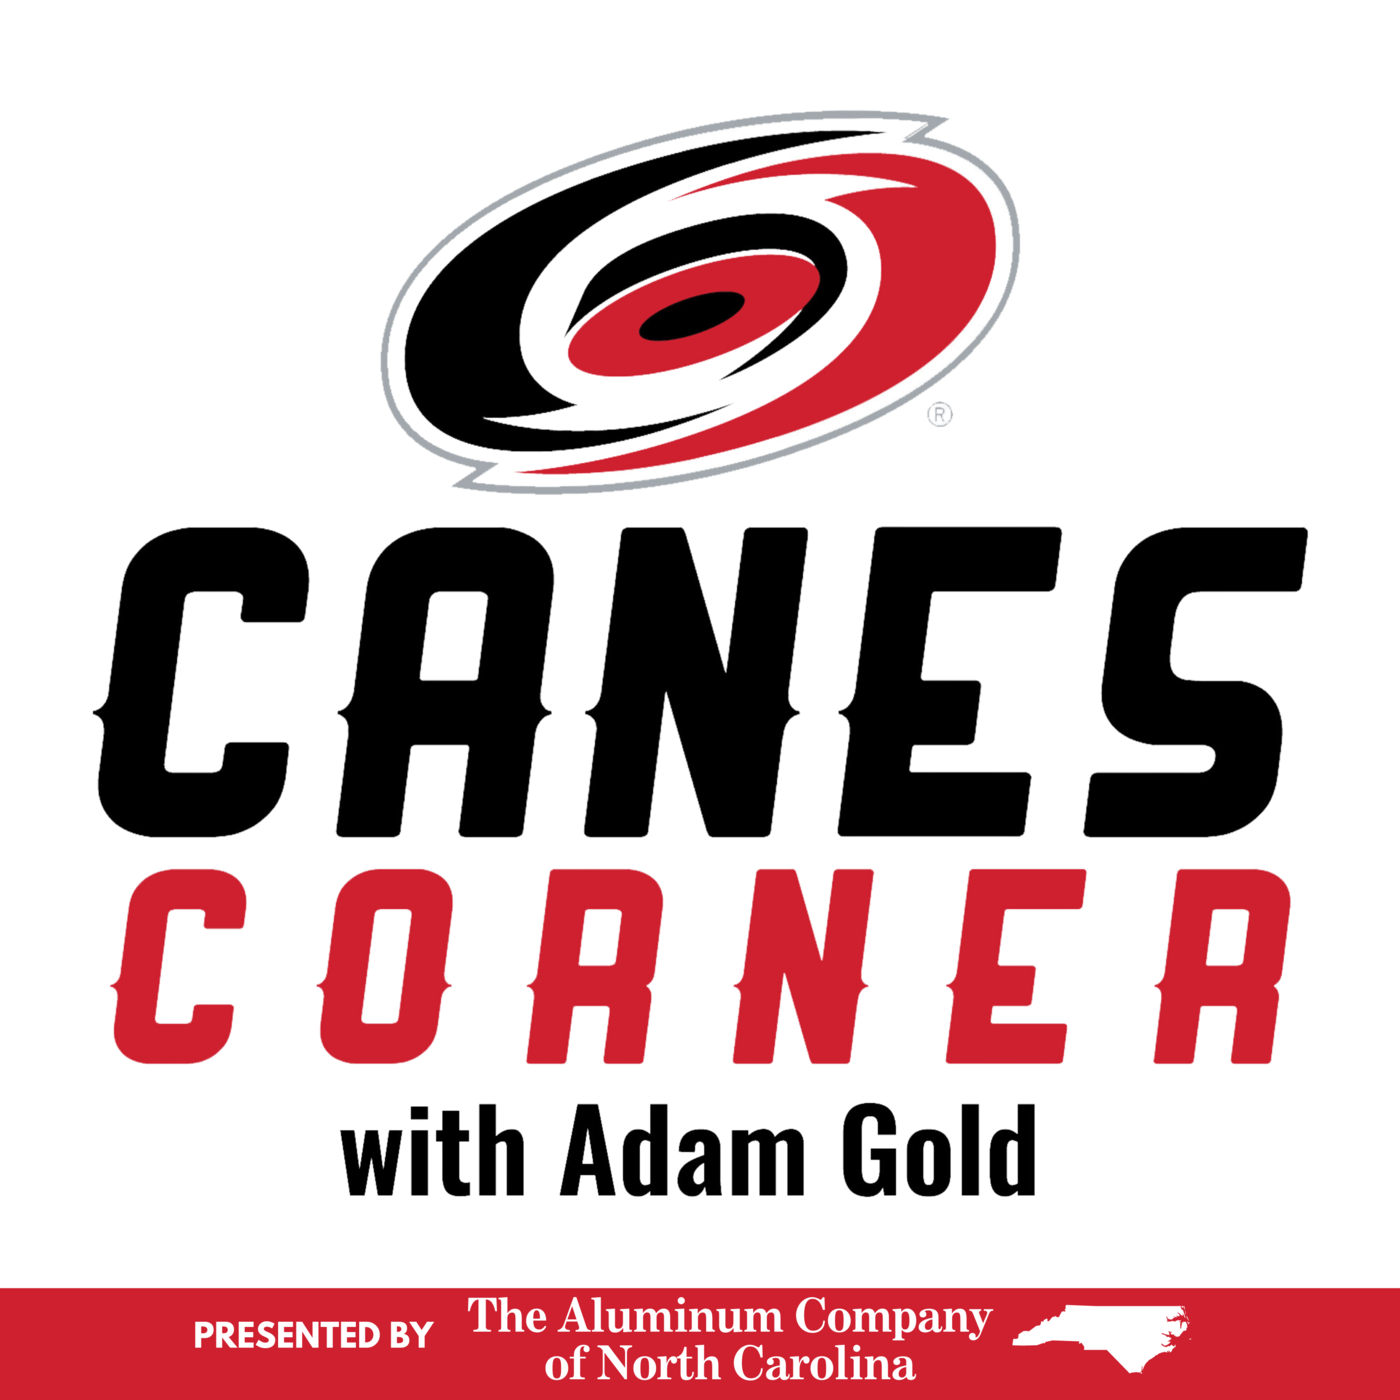 Disaster first period dooms Canes in 4-1 loss to Boston